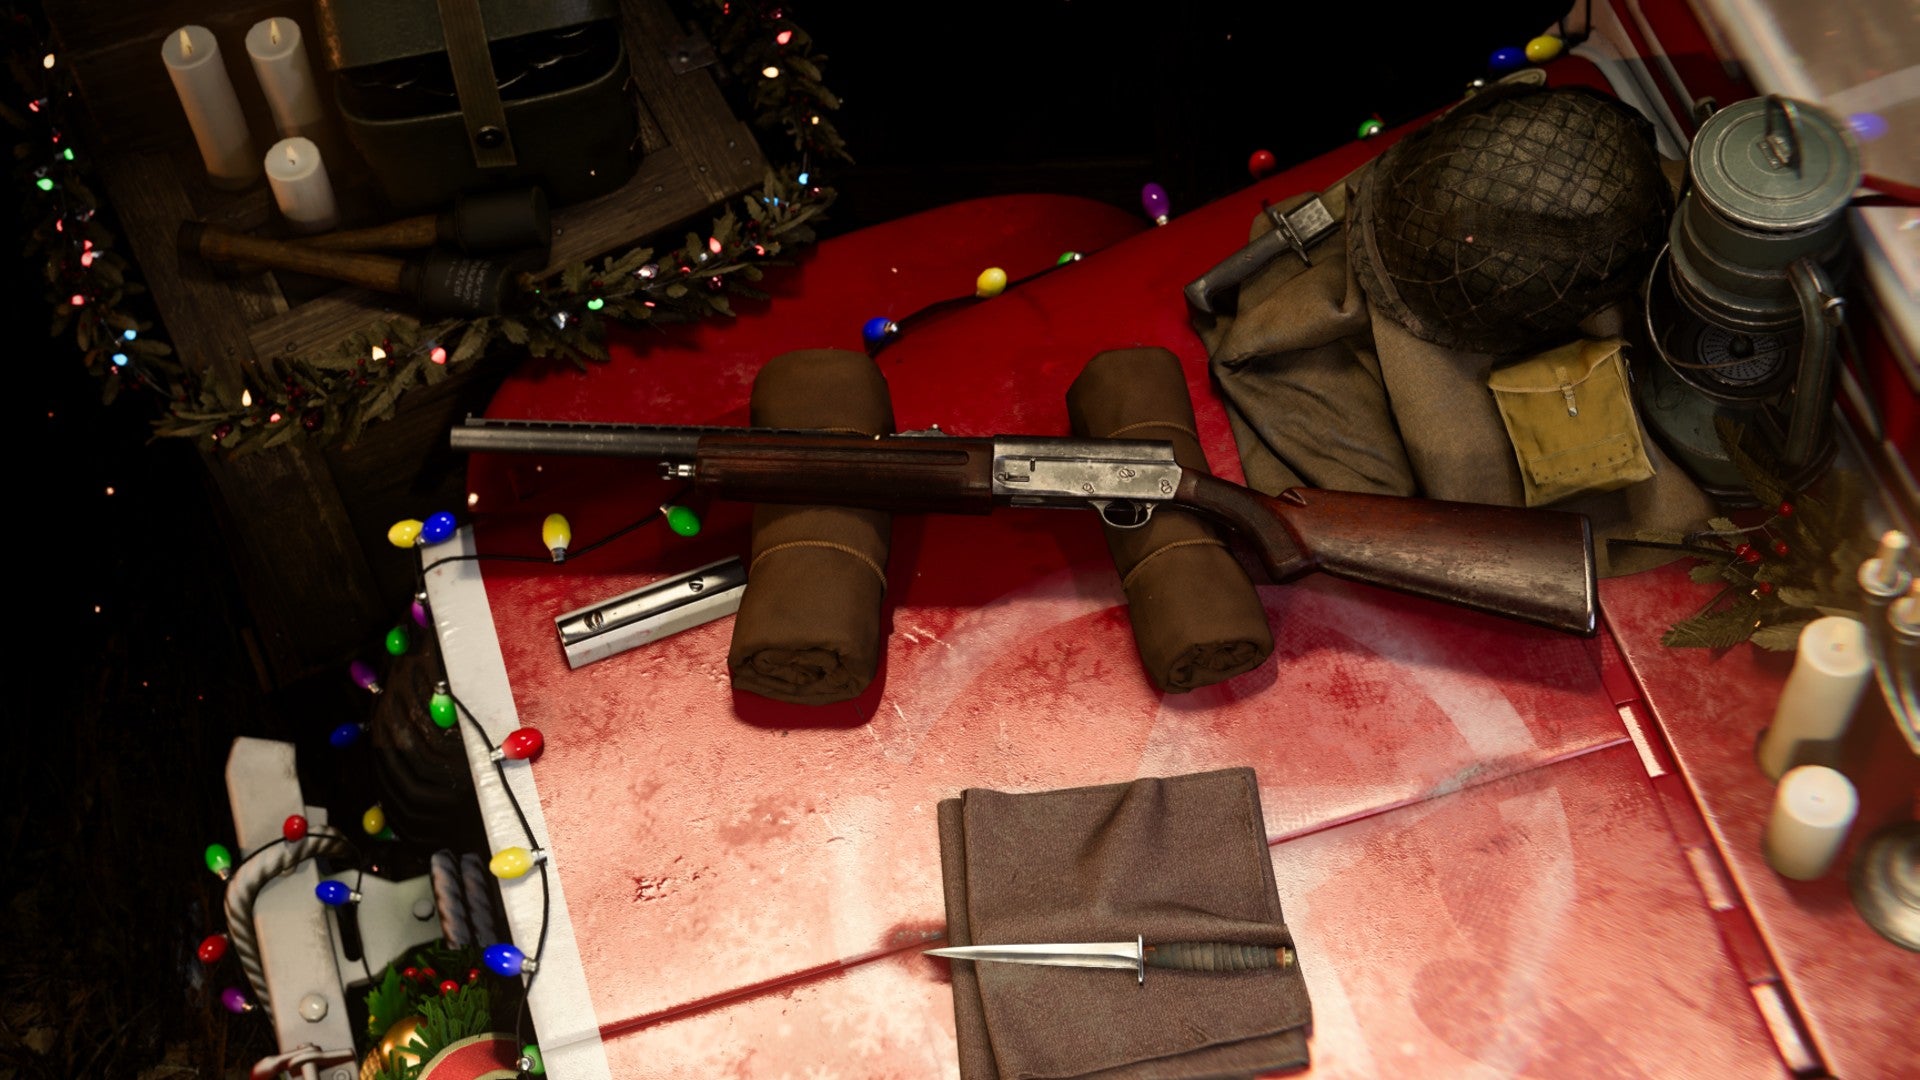 Gracey Auto shotgun placed on a crate, surrounded by festive lights and decorations